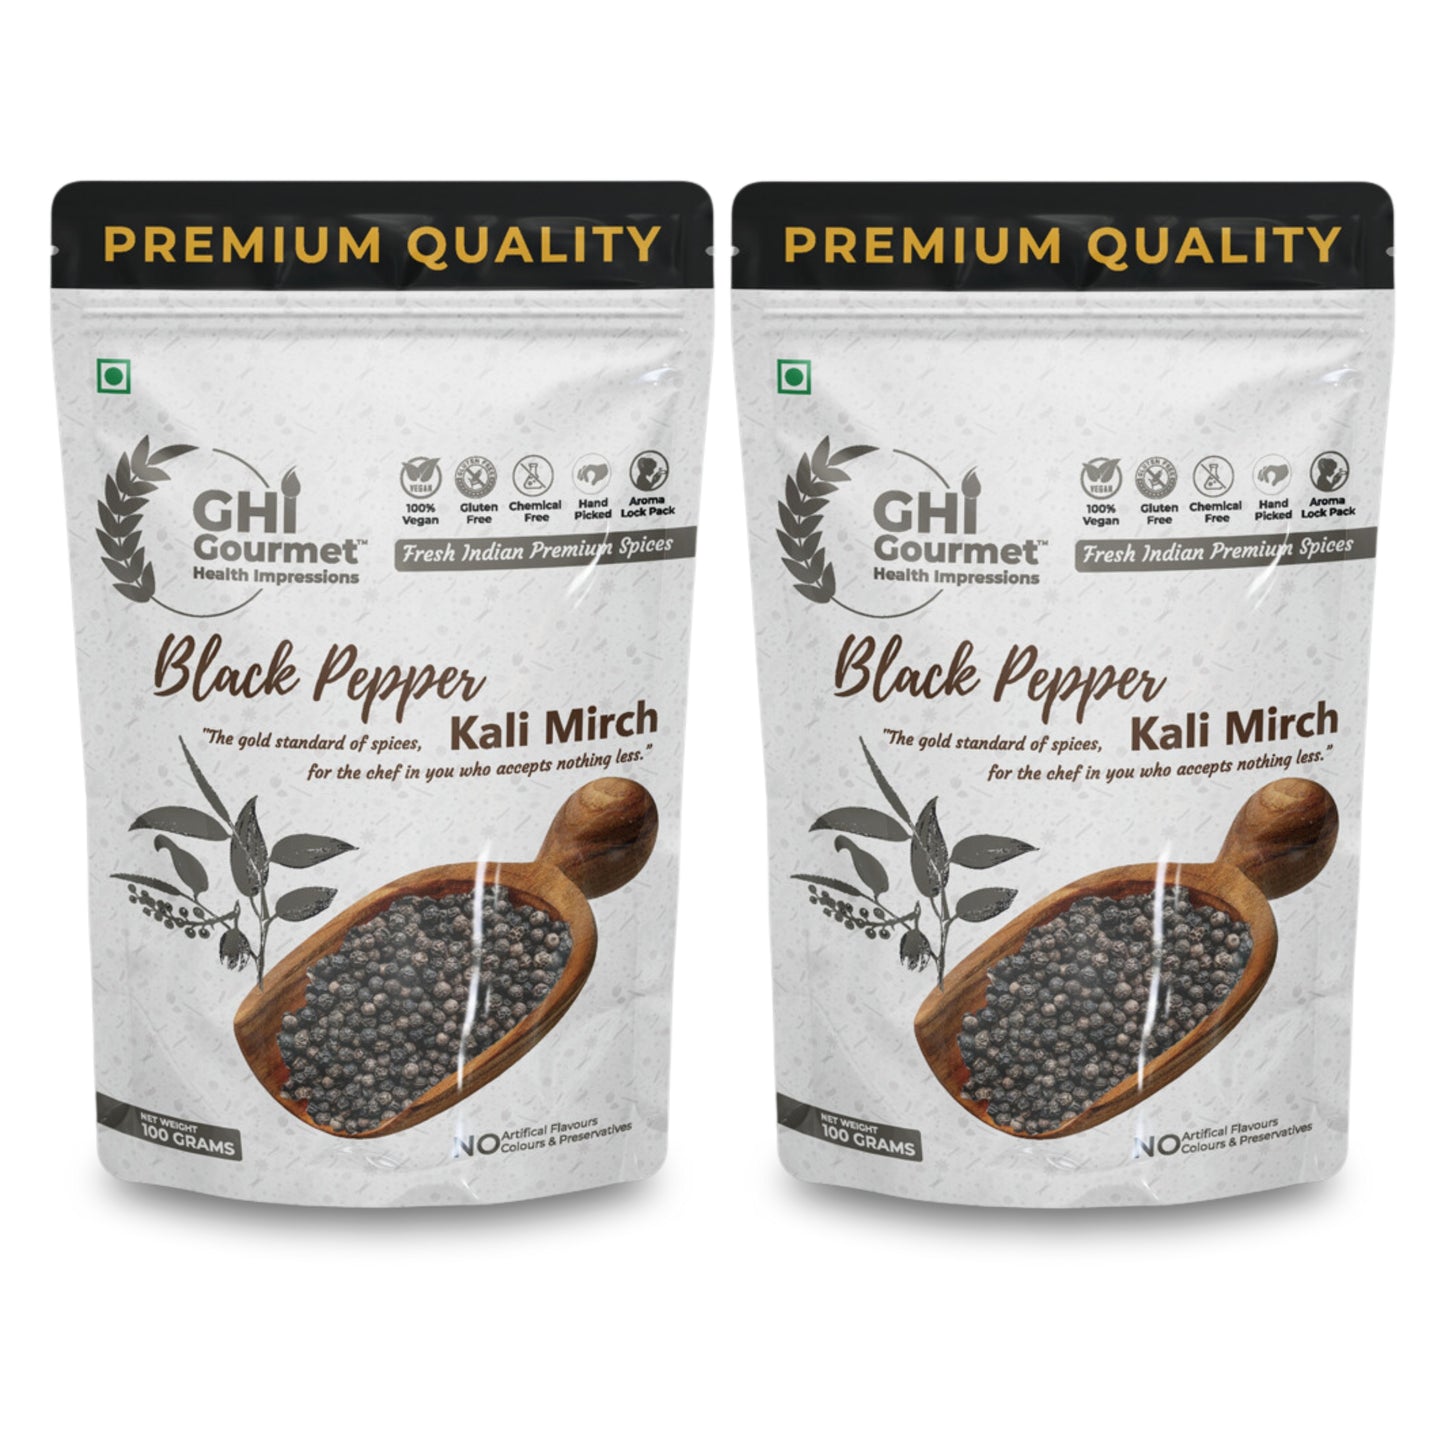 Superior Grade Whole Black Pepper 100g (Pack of 1) and 200g (Pack of 2)